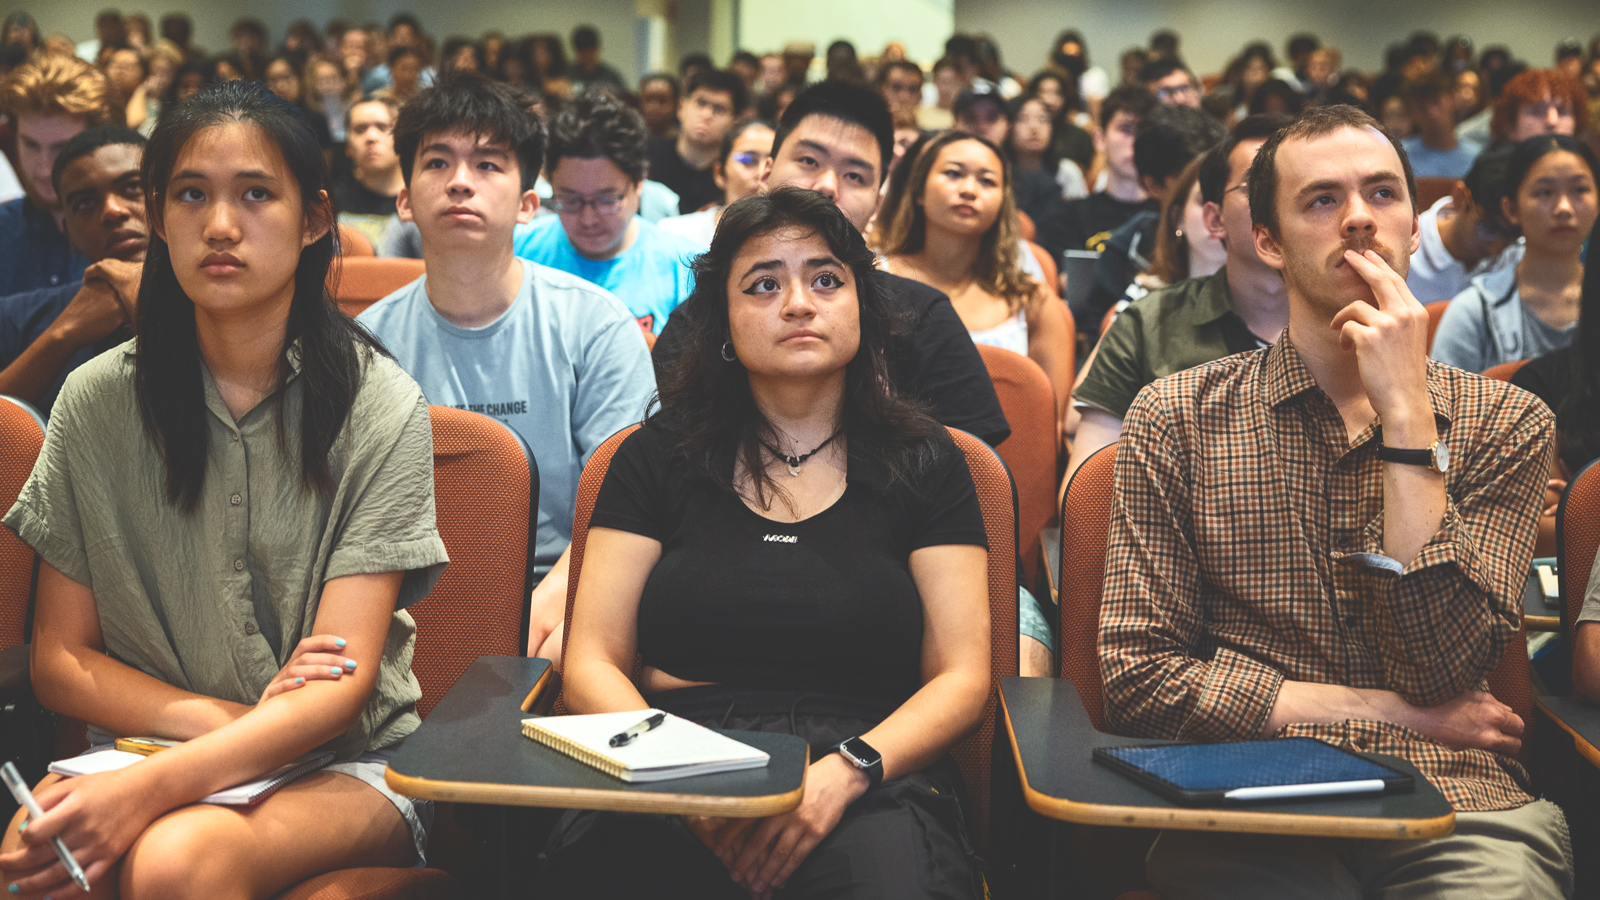 A lecture hall filled with college-aged students who are all looking in the same direction toward the front of the room.